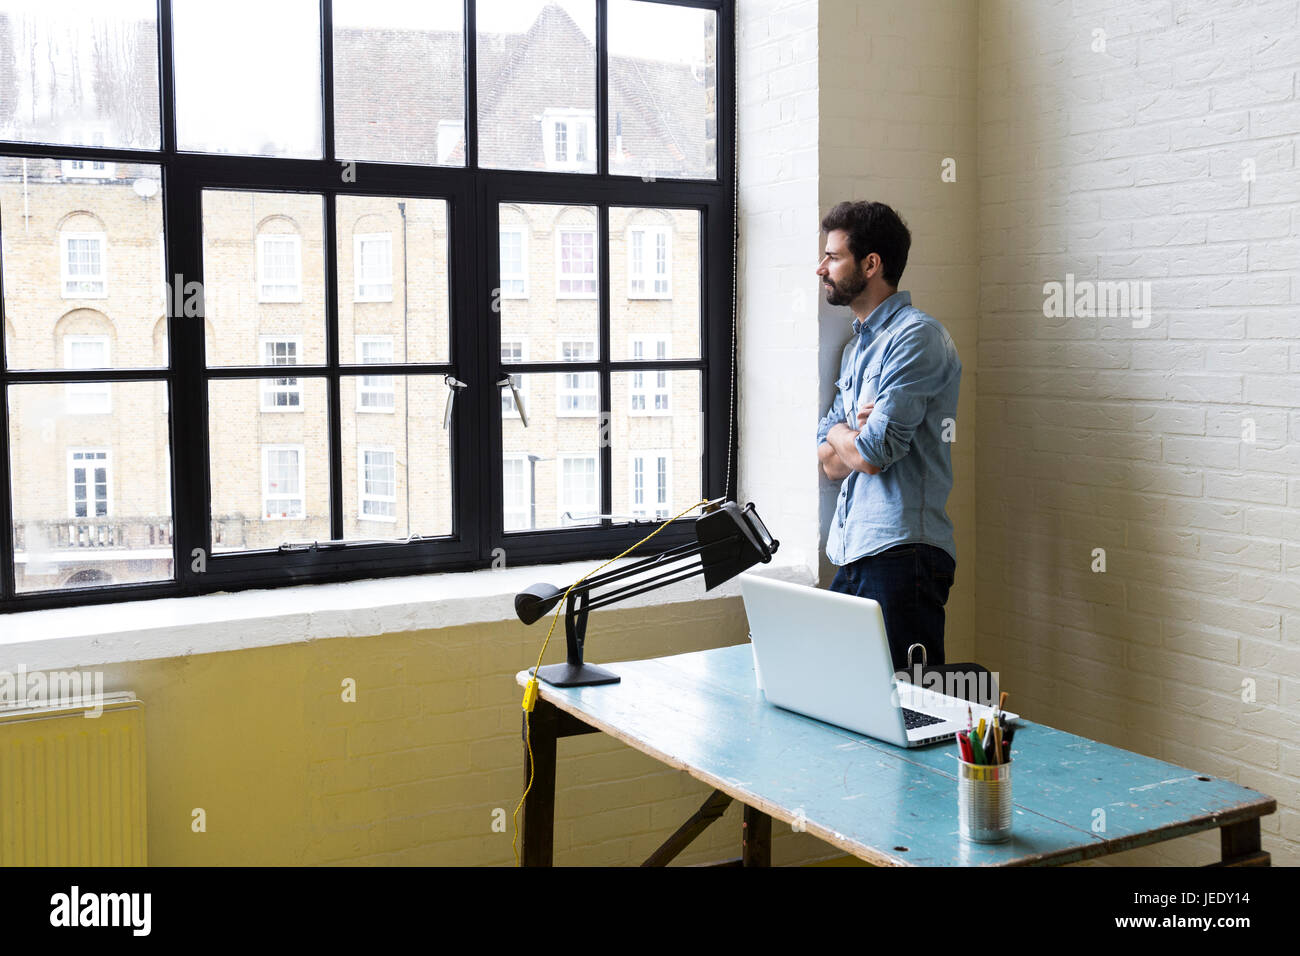 Man leaning against a wall looking out of window Stock Photo